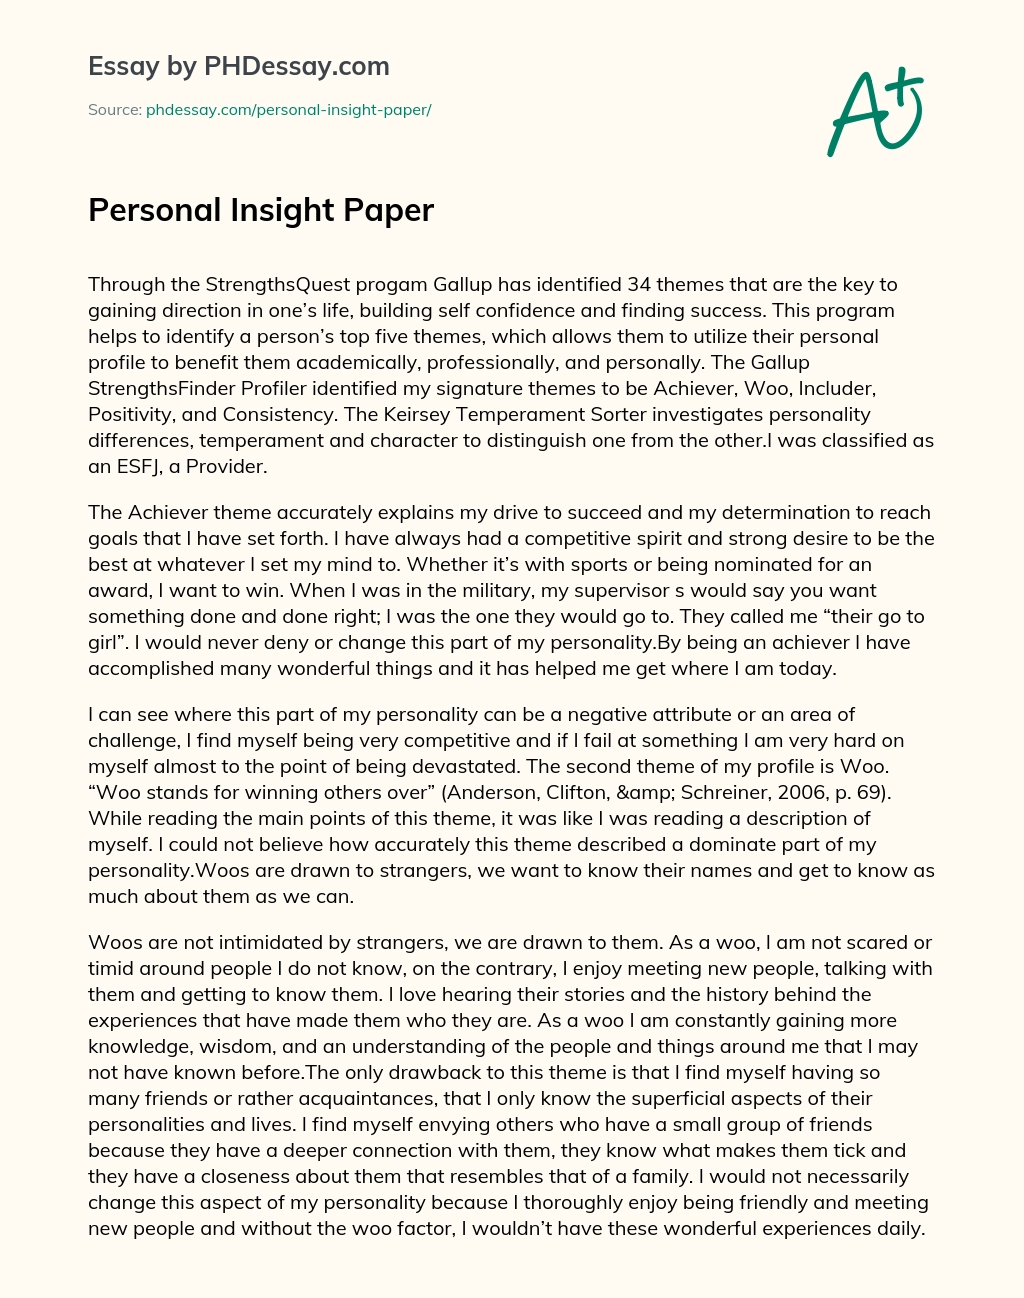 Personal Insight Paper essay